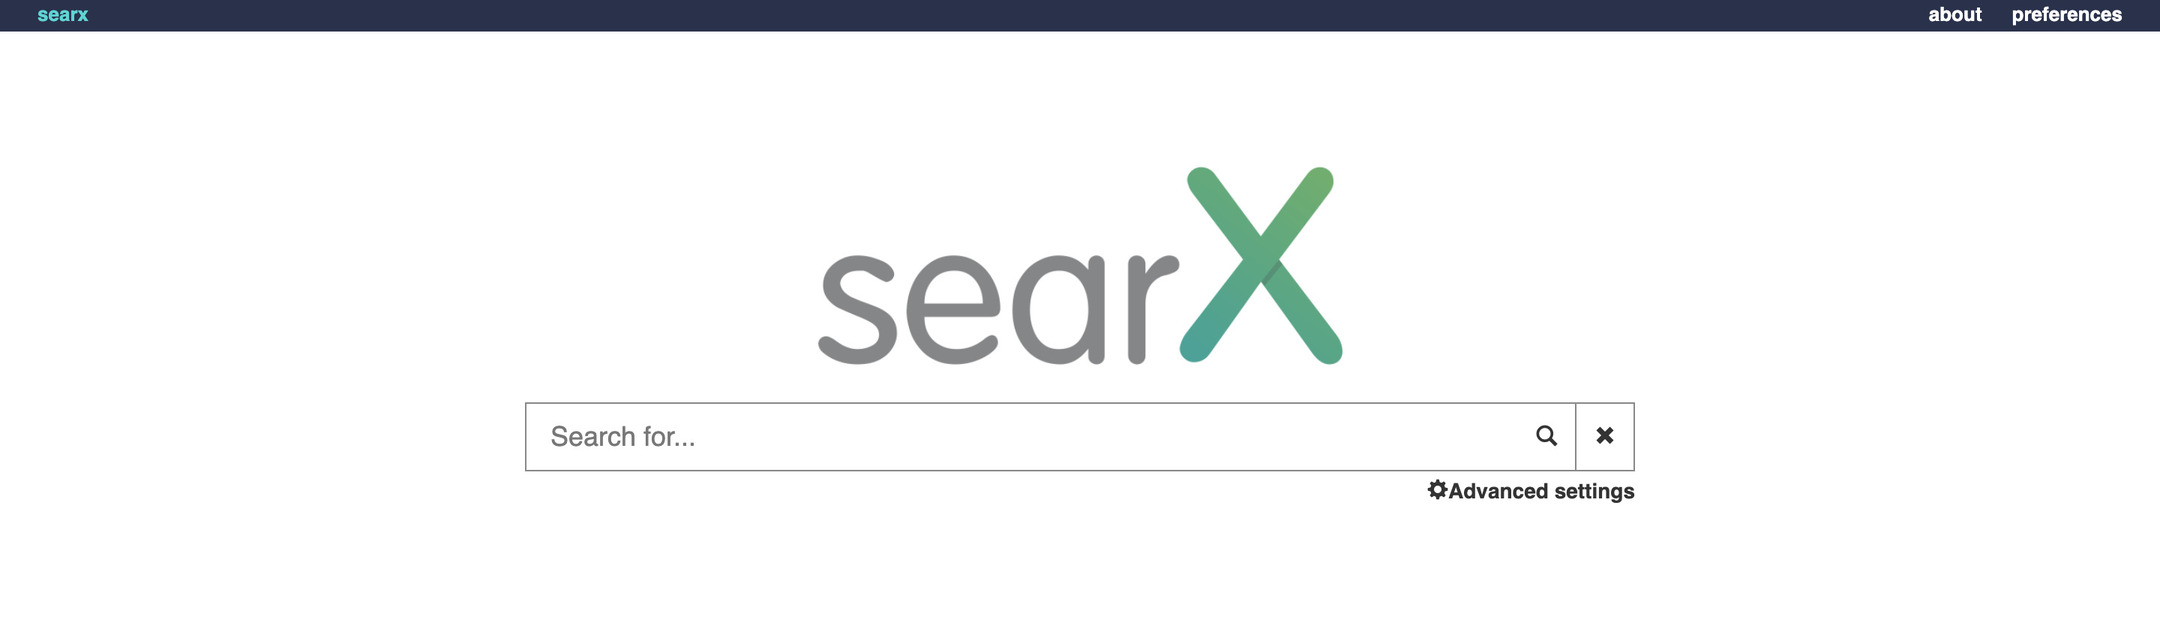 searx: privacy oriented web browser